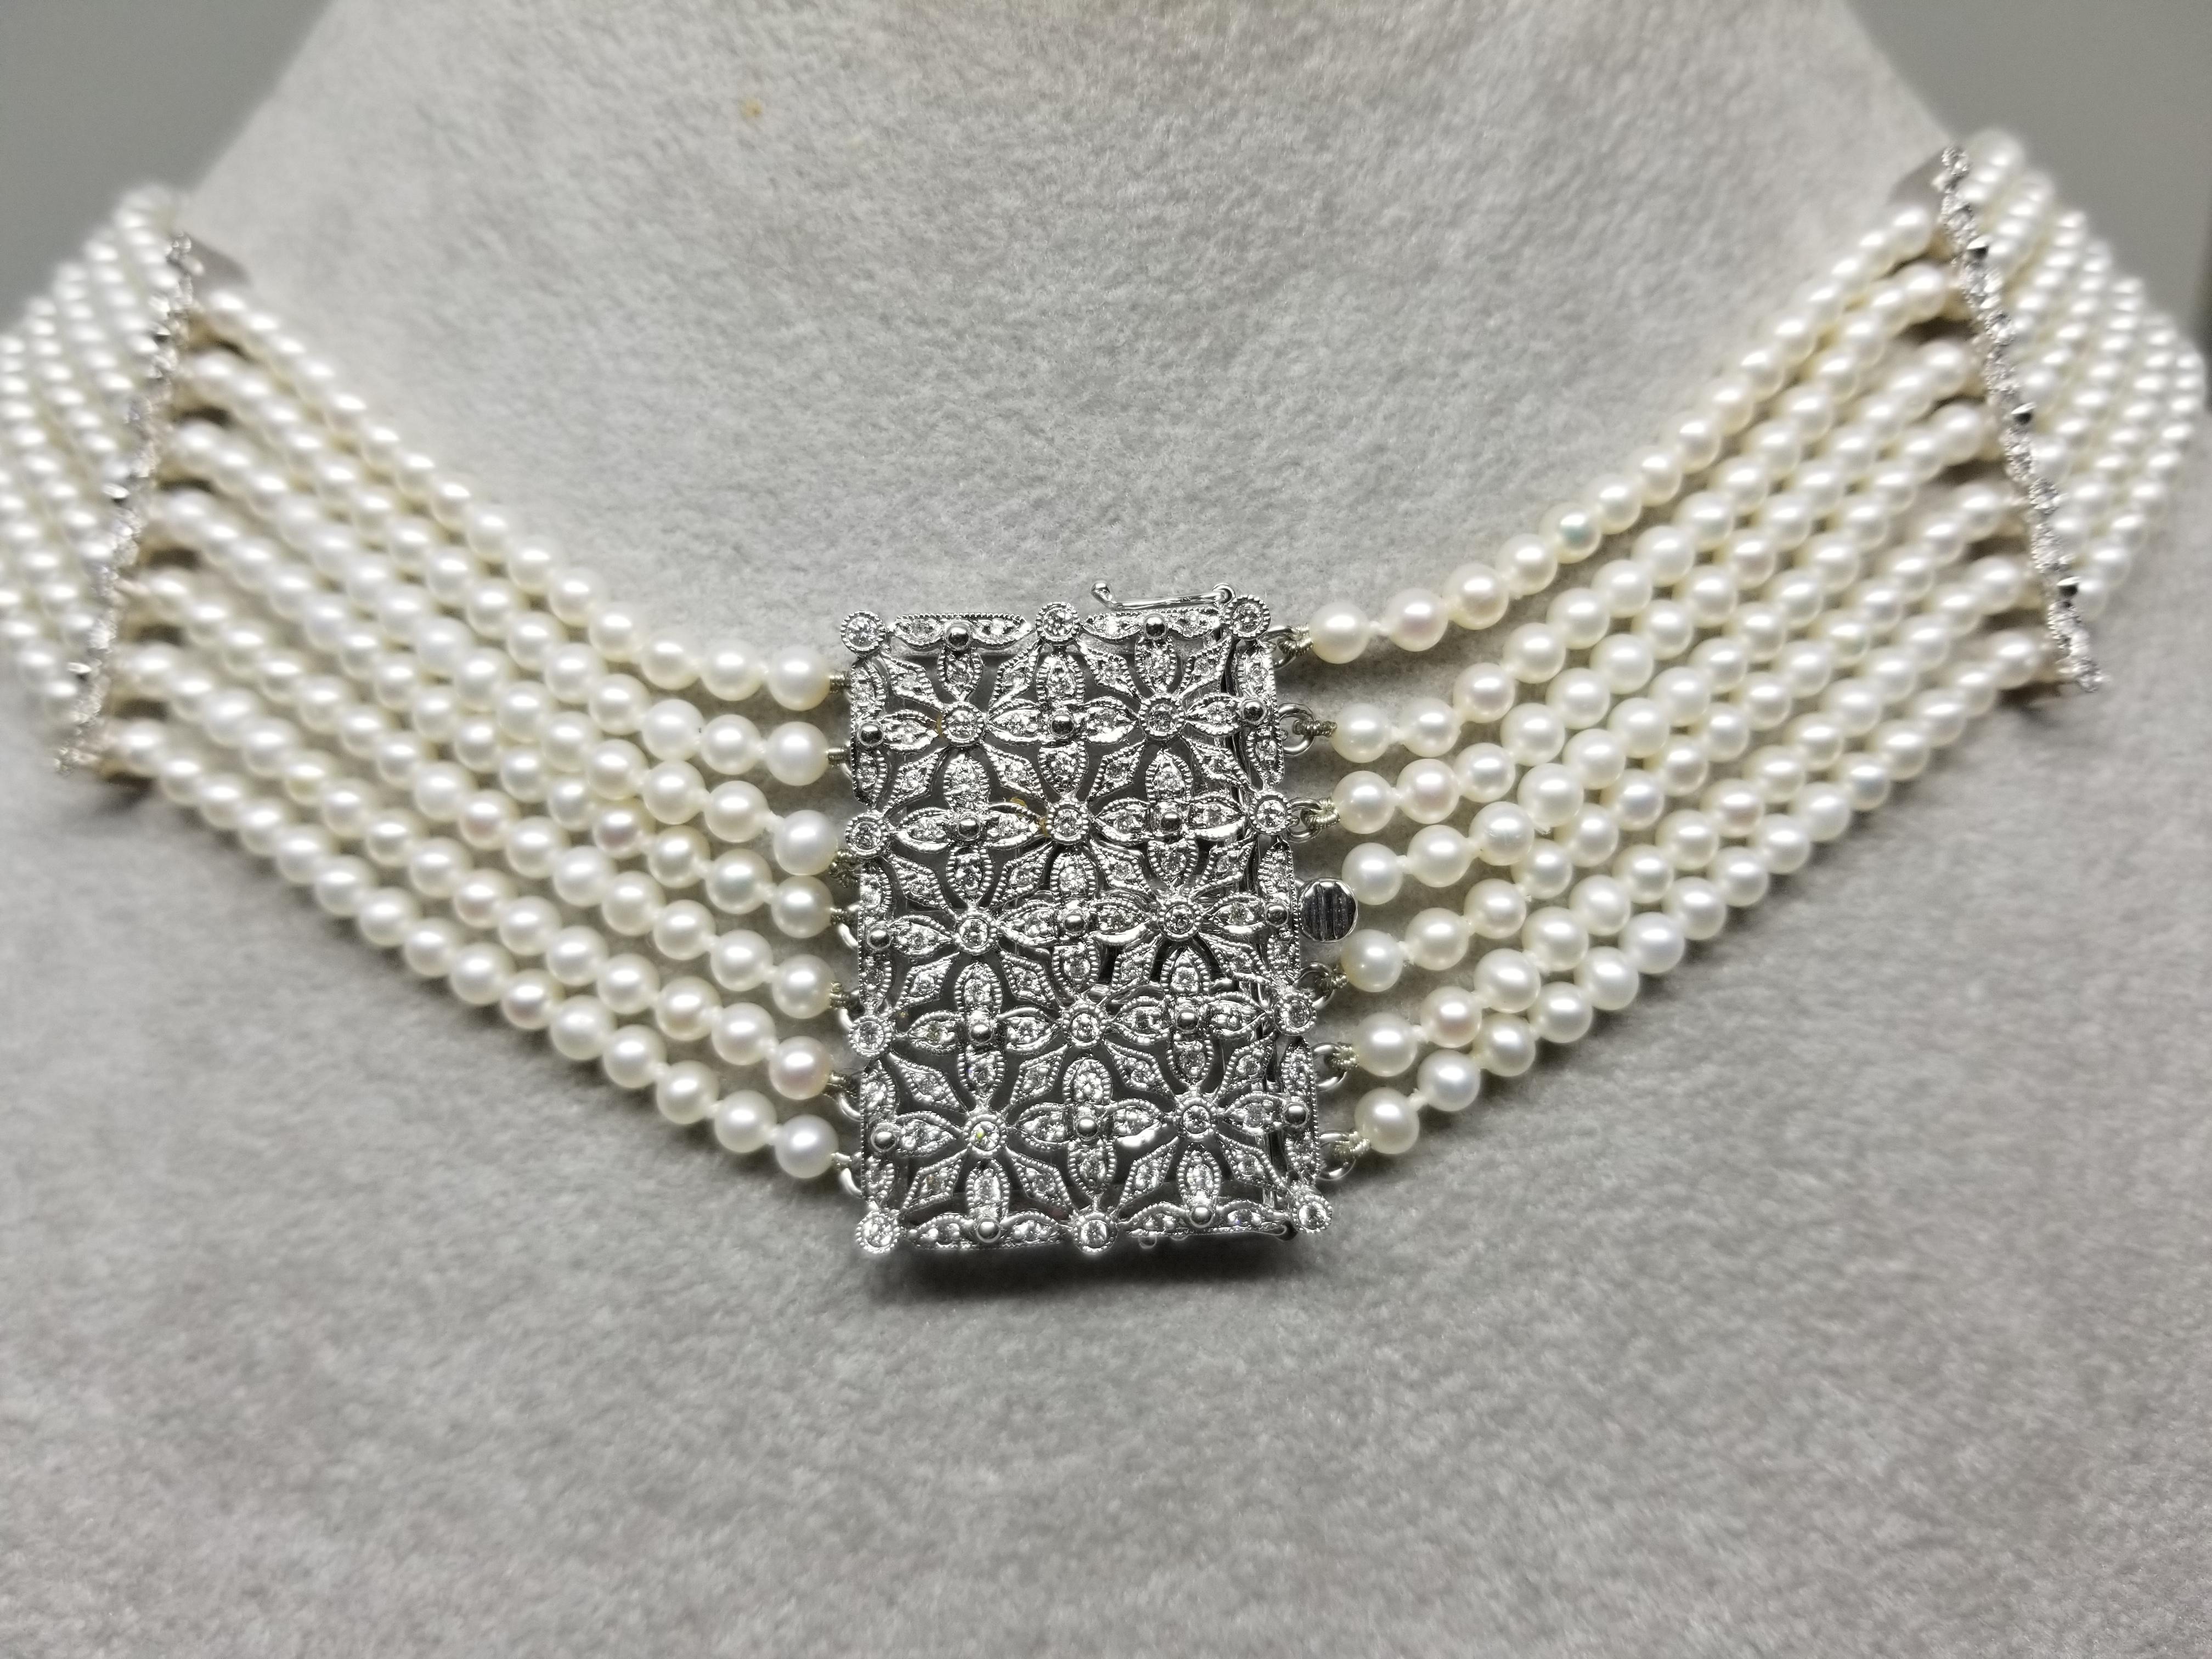 Gorgeous 18k white gold diamond and pearl collar pendant, containing 100 round full cut diamonds; color 